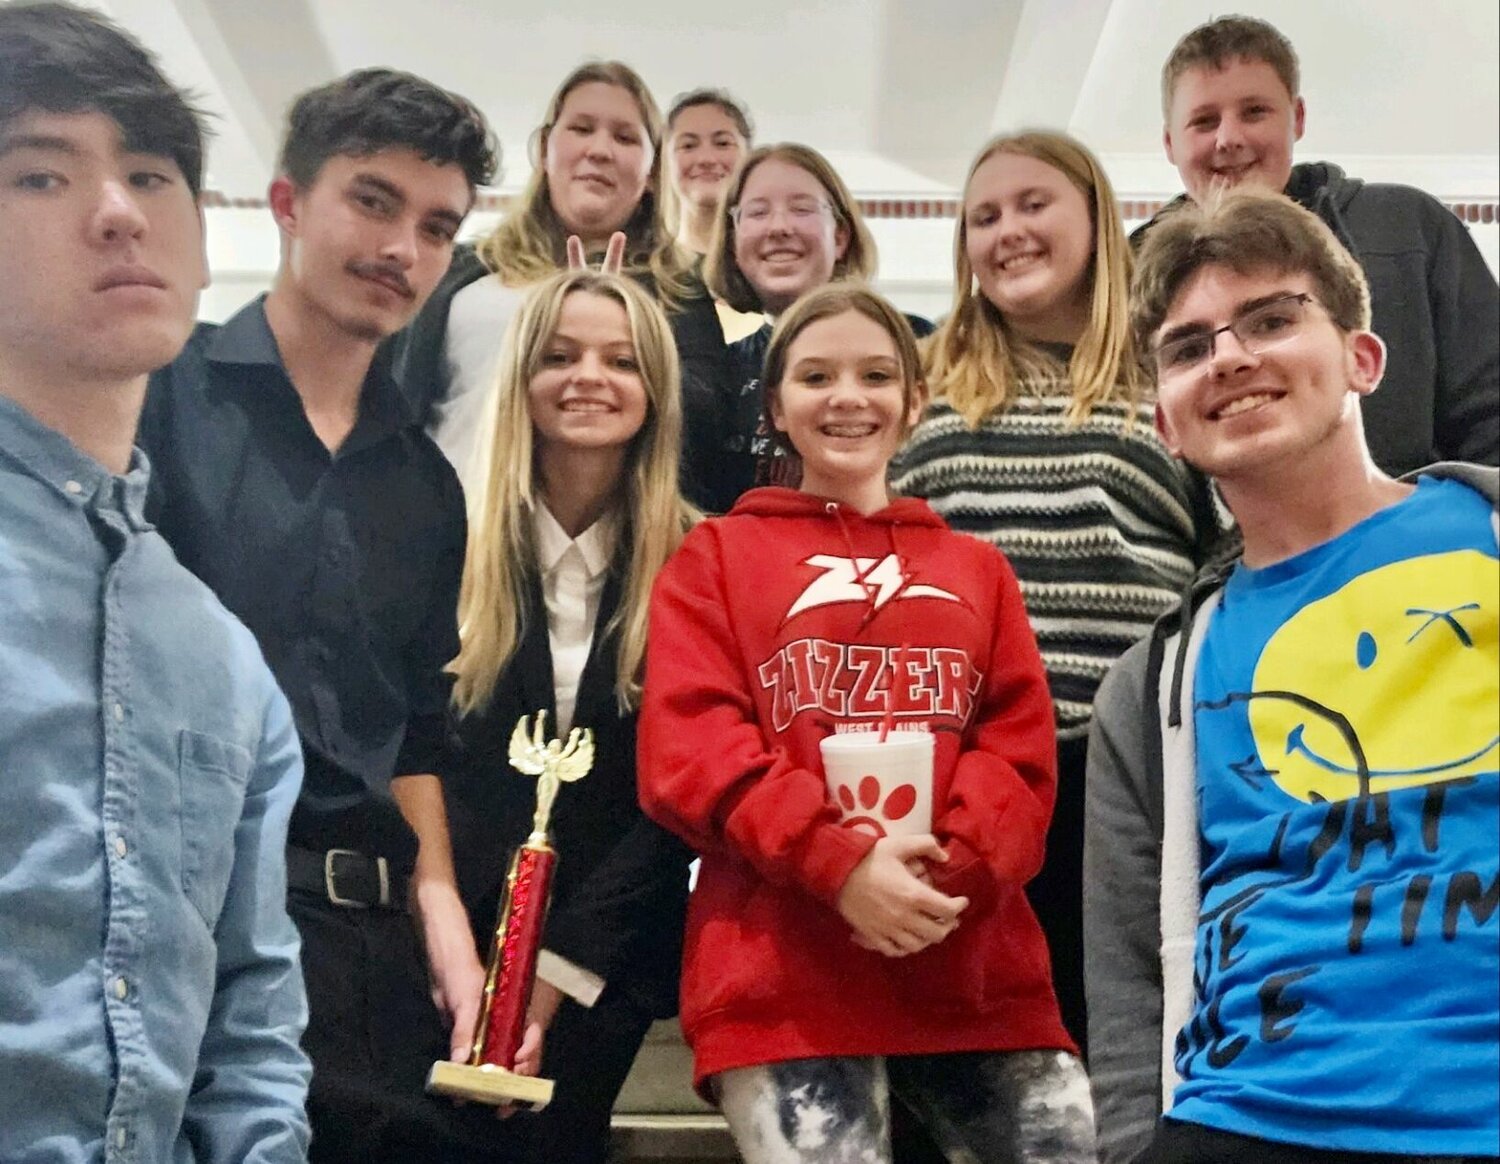 The West Plains High School Speech and Debate team competed Oct. 13 and 14 in a tournament at Missouri State University in Springfield. The following students moved on to semifinals in their events: Kaylee Adams, Alannah Gower, Grace Eades, Taylor Merriman, Myah Hibler, Zane Vermillion and Caden Sciotto. Of those who competed in semifinals, Sciotto, a sophomore, moved on to finals, and was awarded second place in Novice Original Oratory at his first-ever Speech and Debate tournament.